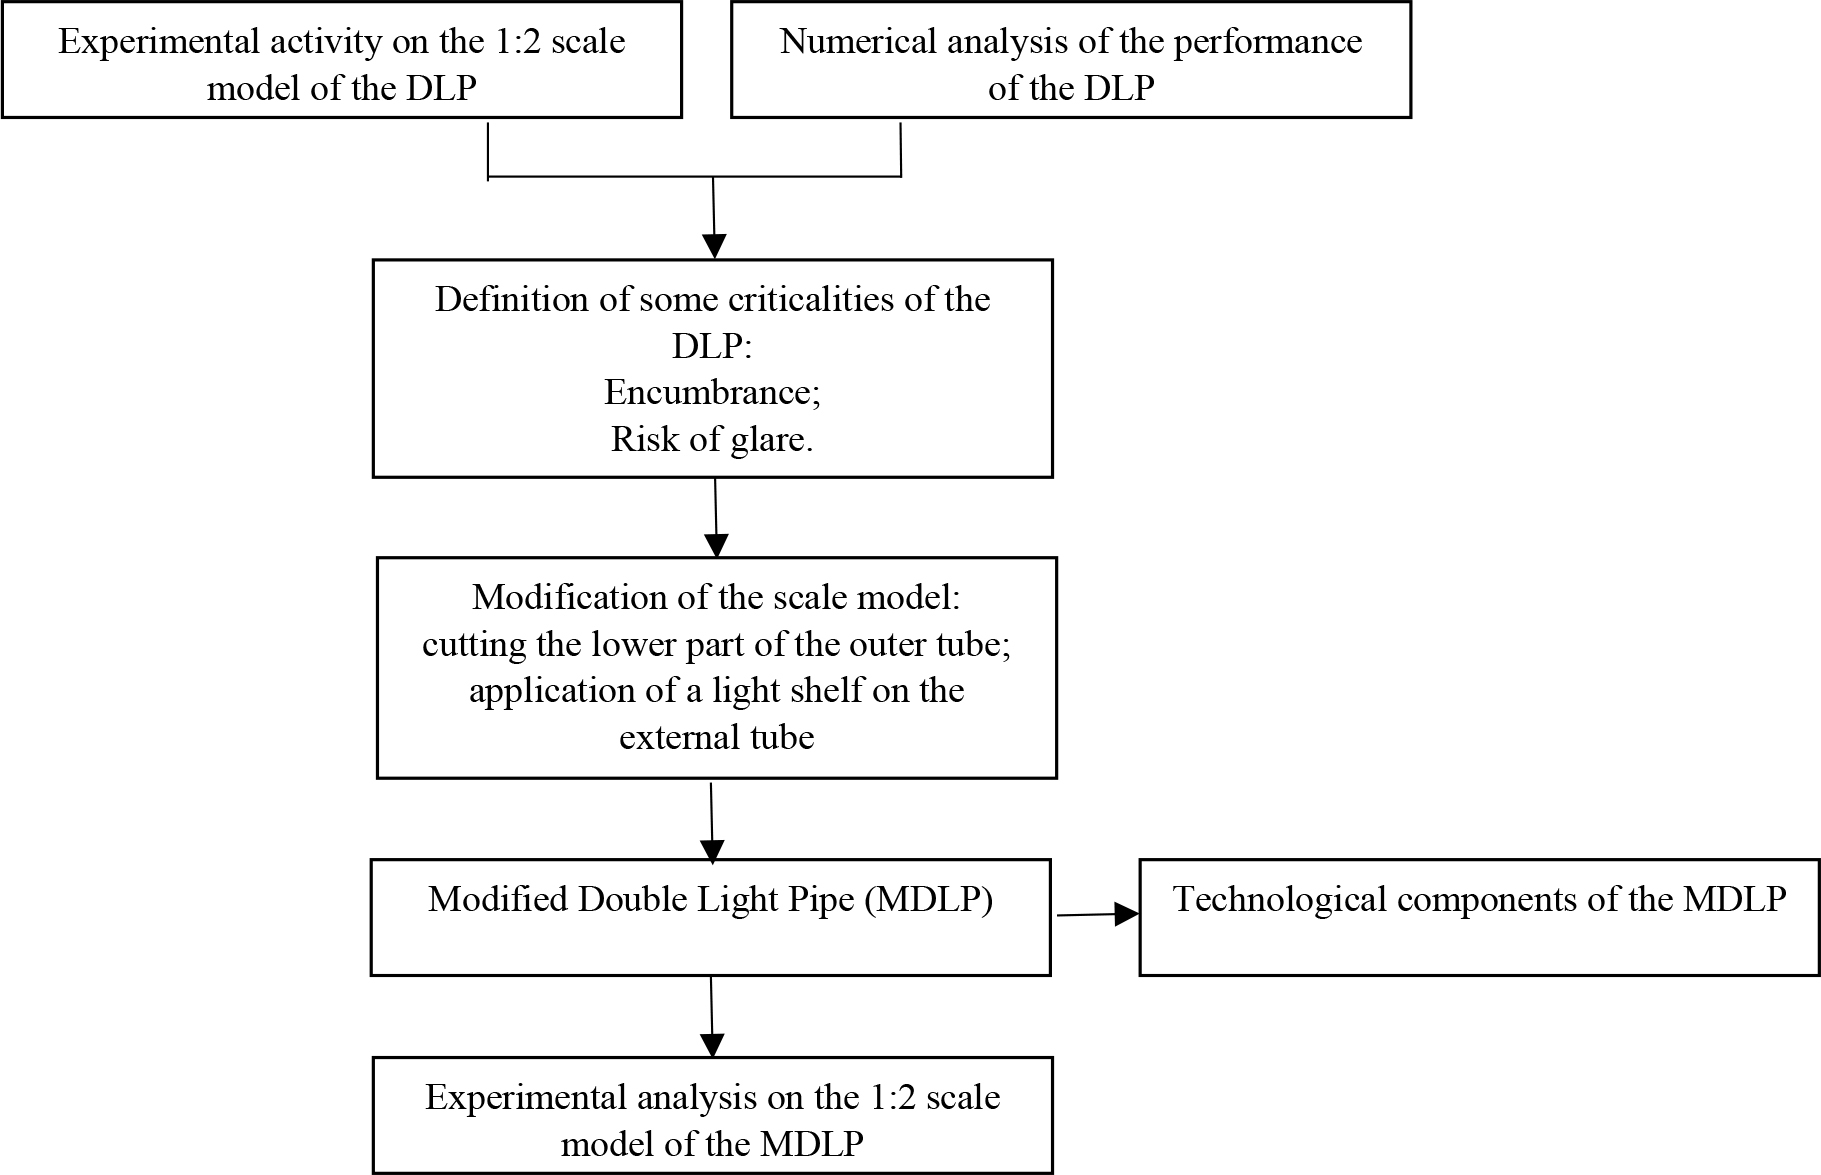 Sequence of the steps that led to the creation of the MDLP and the determination of its performance.